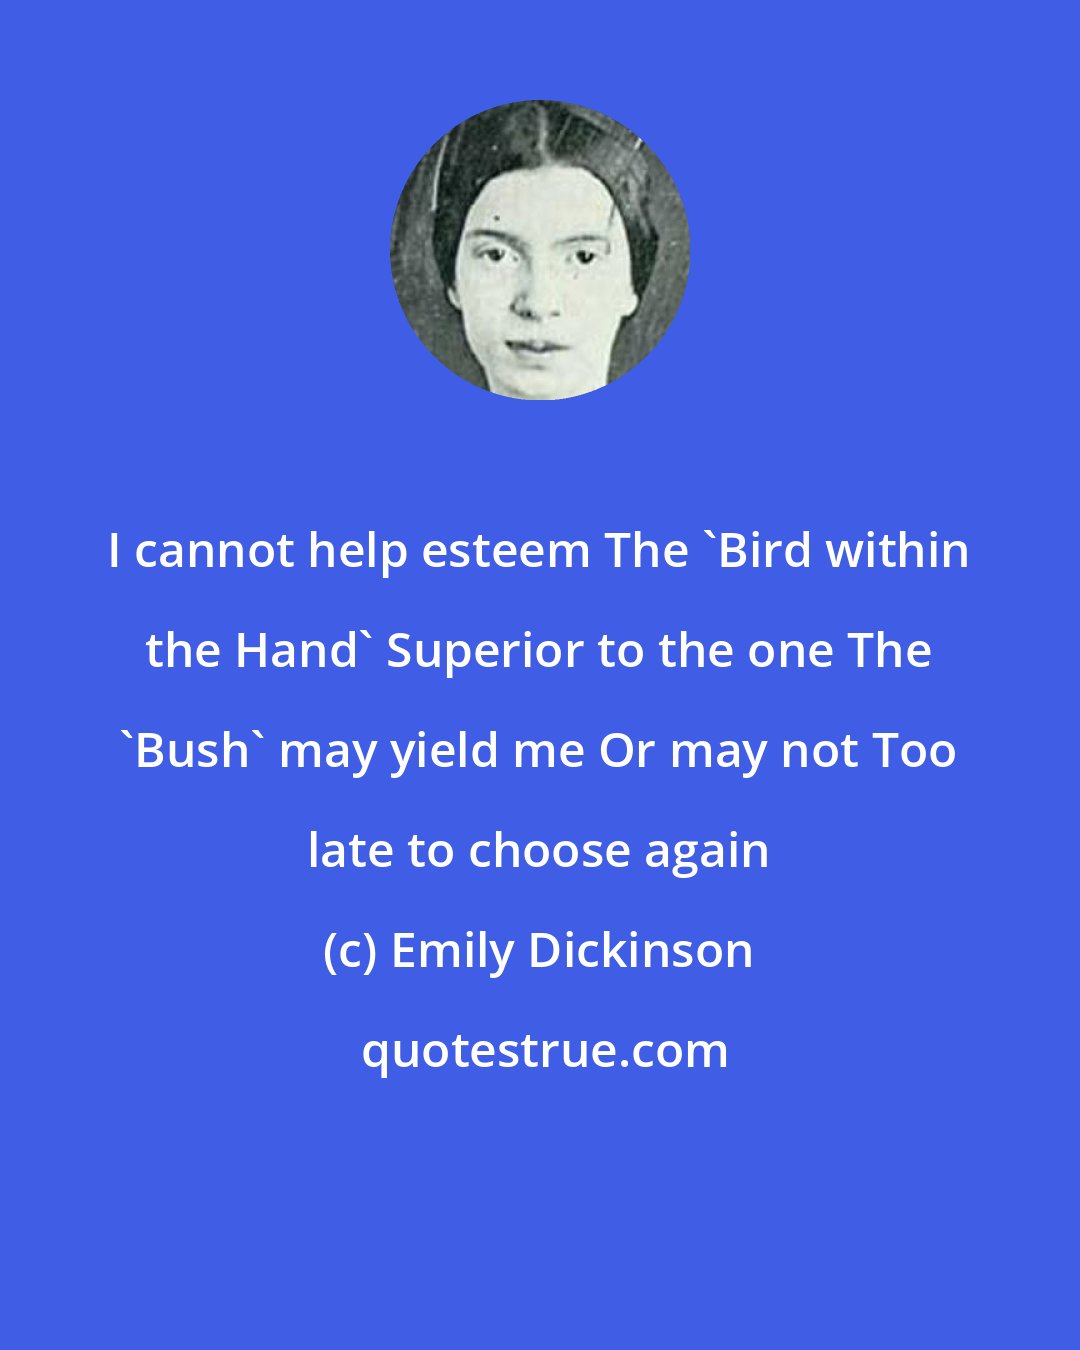 Emily Dickinson: I cannot help esteem The 'Bird within the Hand' Superior to the one The 'Bush' may yield me Or may not Too late to choose again